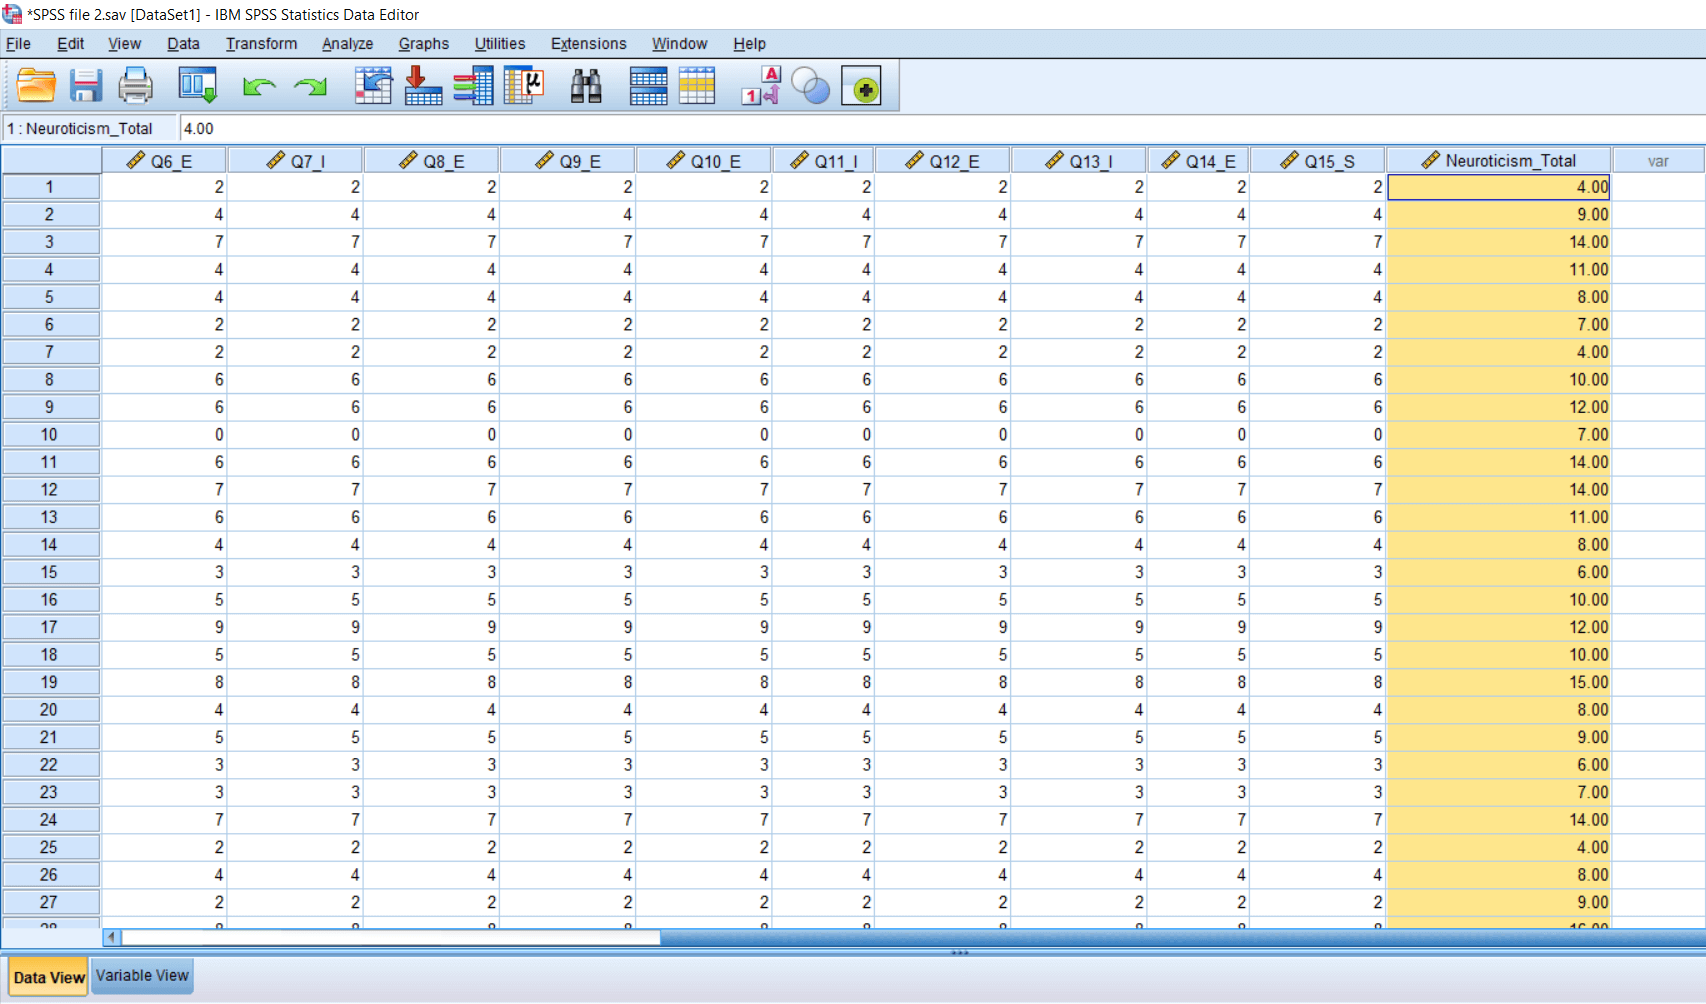 Calculating Total using Compute function